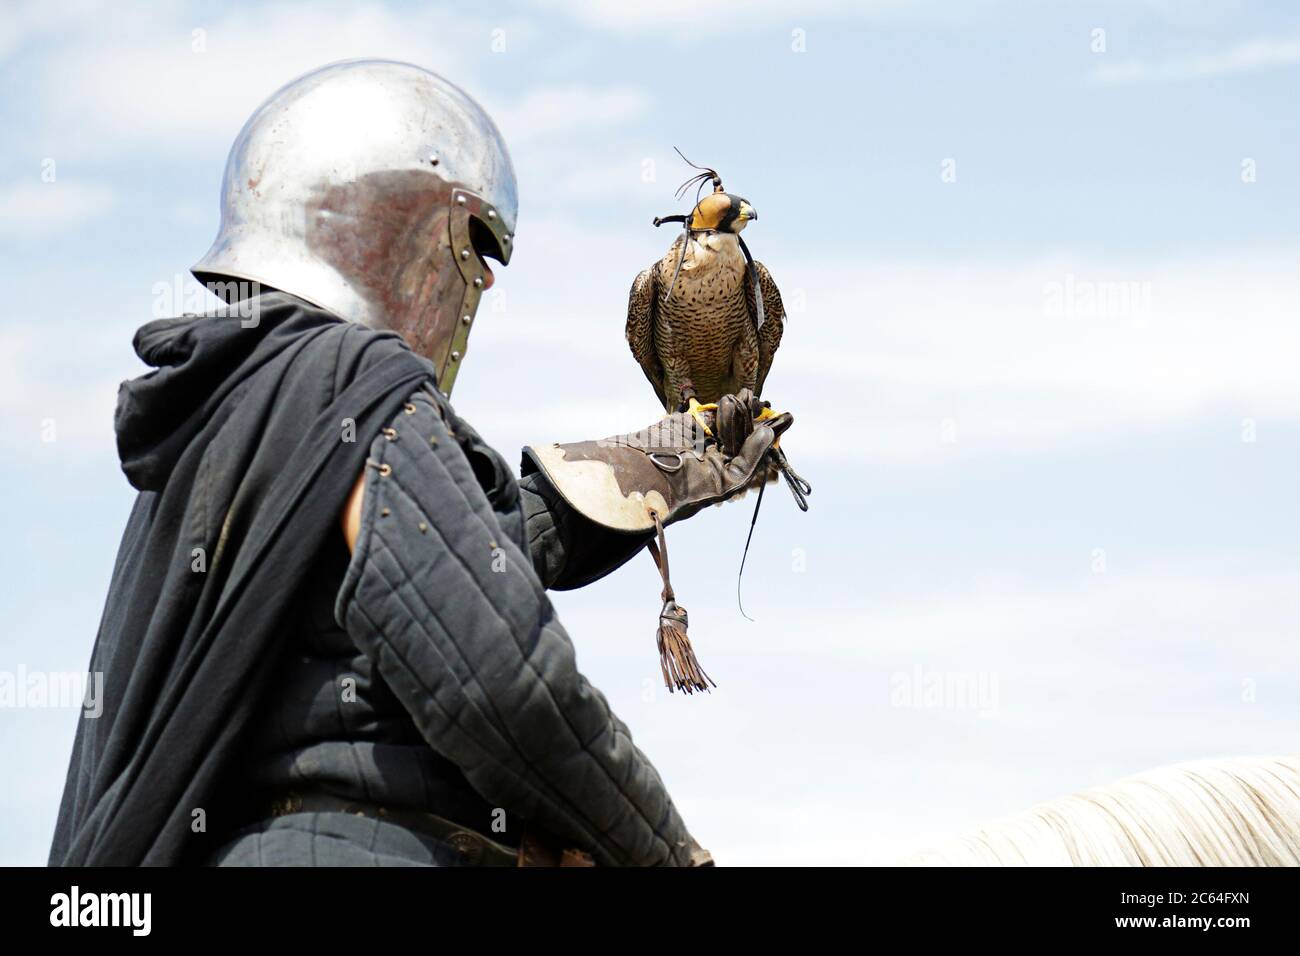 Medieval Falconry High Resolution Stock Photography and Images - Alamy